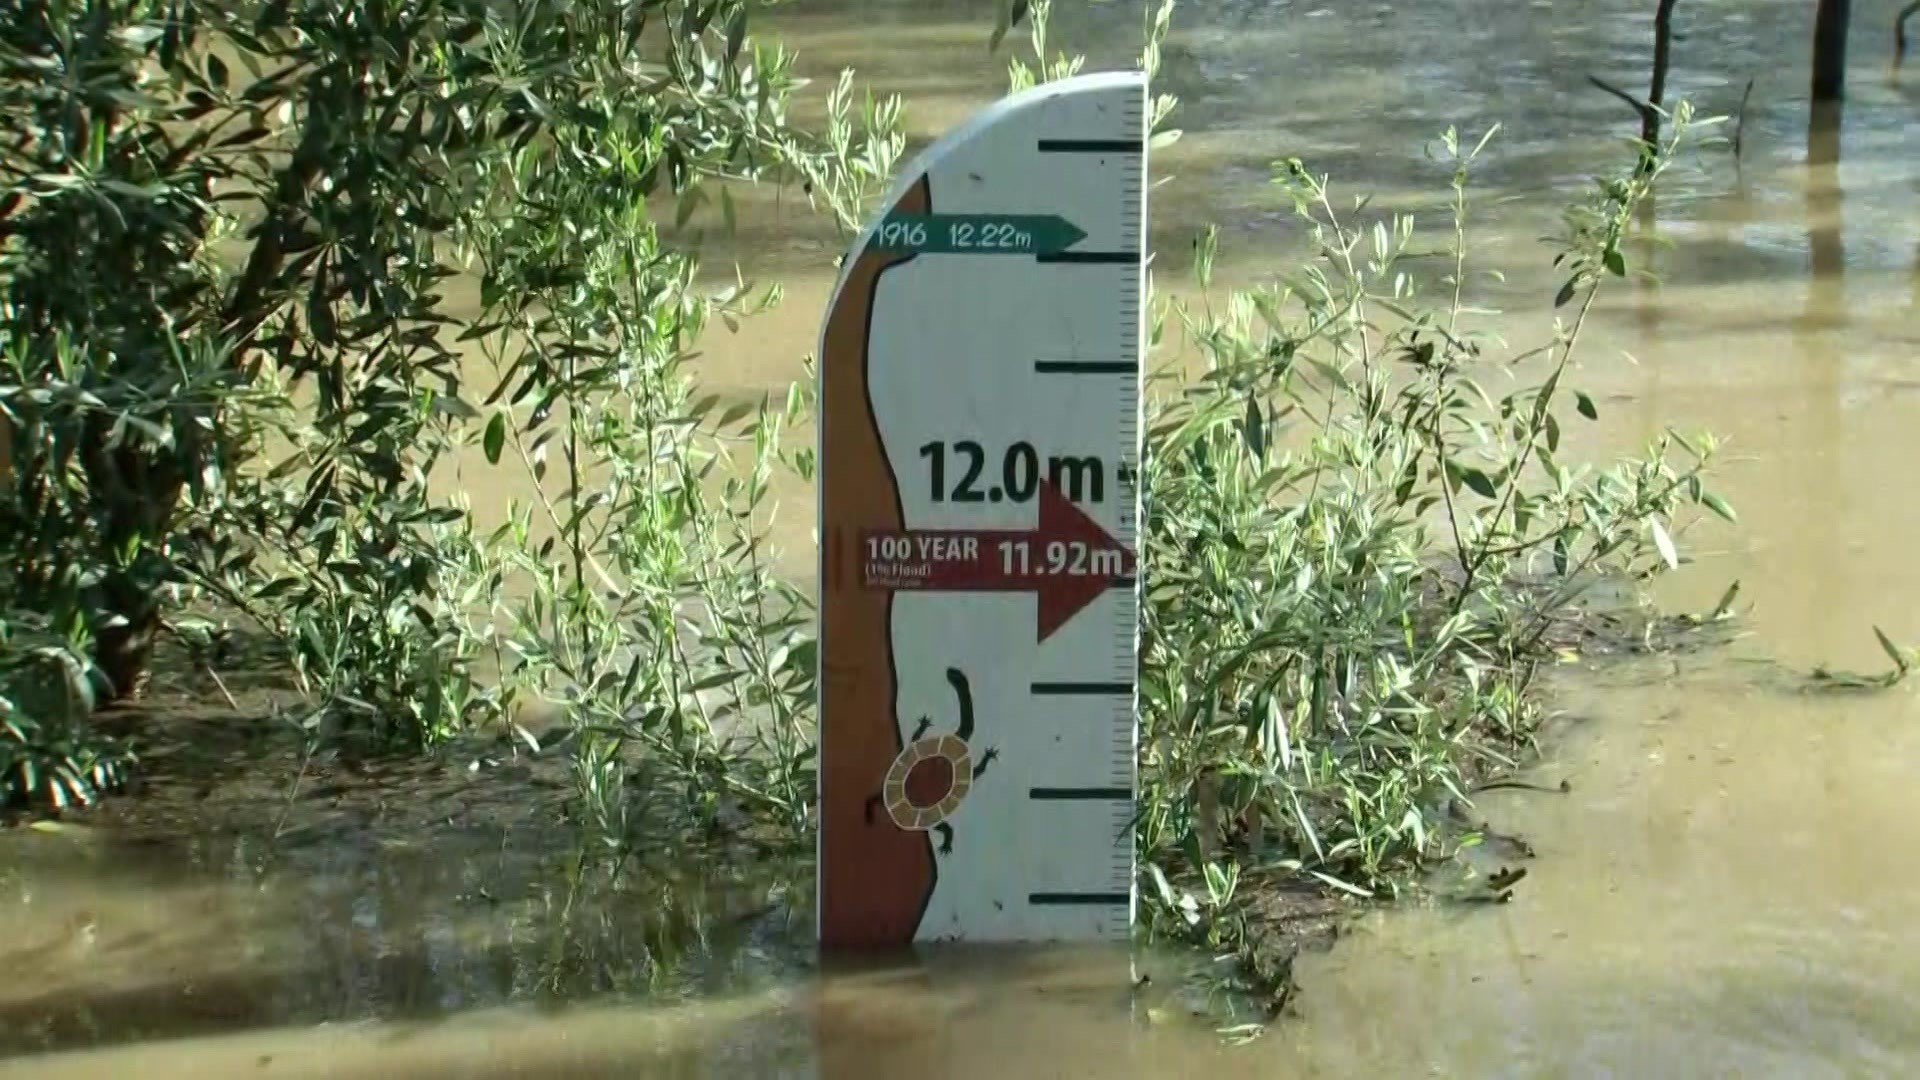 A flood sign showing the river level below 12 metres in depth surrounded by floodwater.